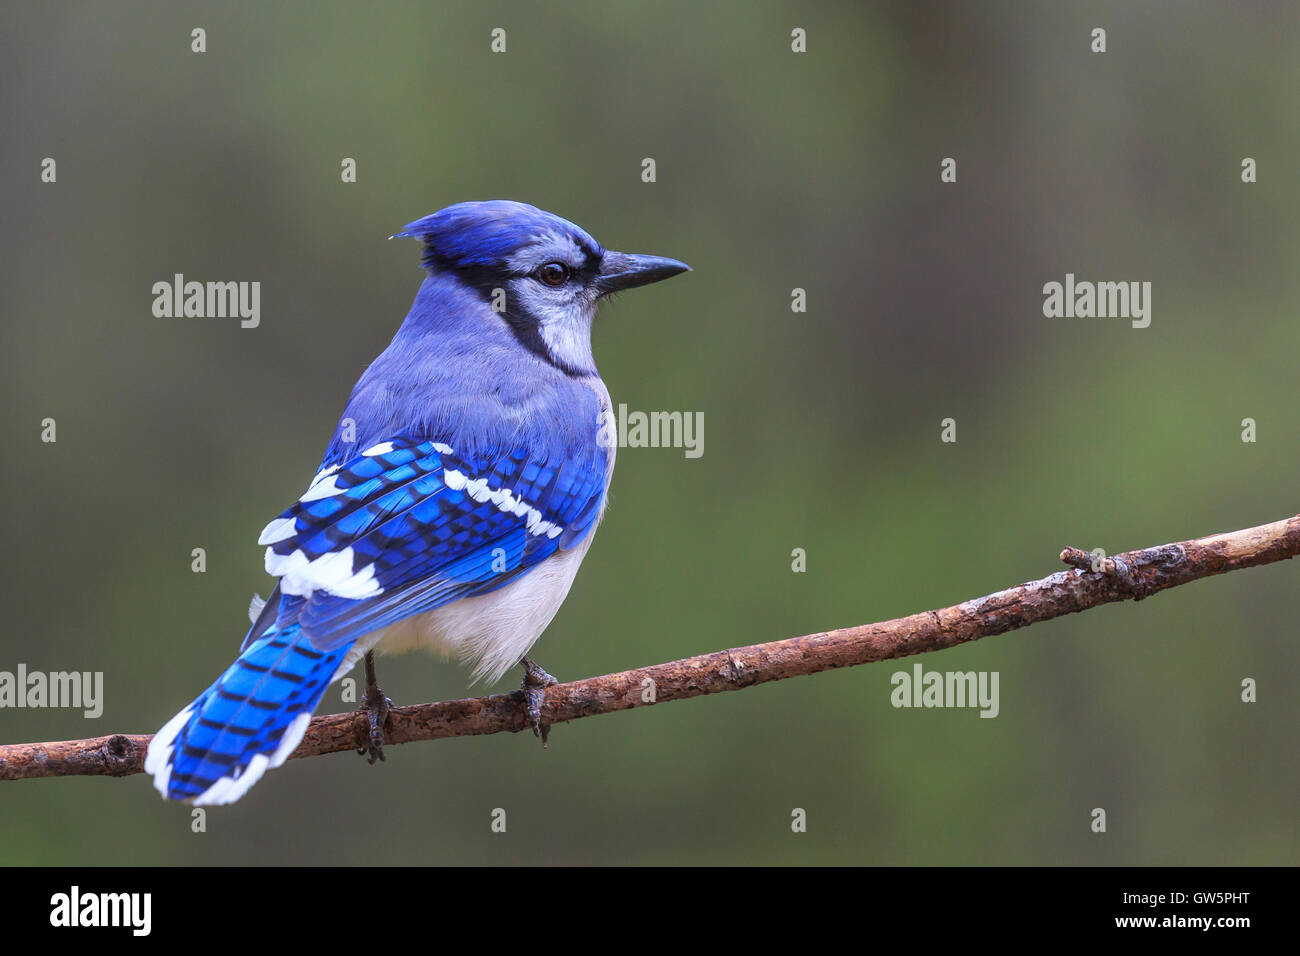 Colorful blue jay perched on a branch. Stock Photo